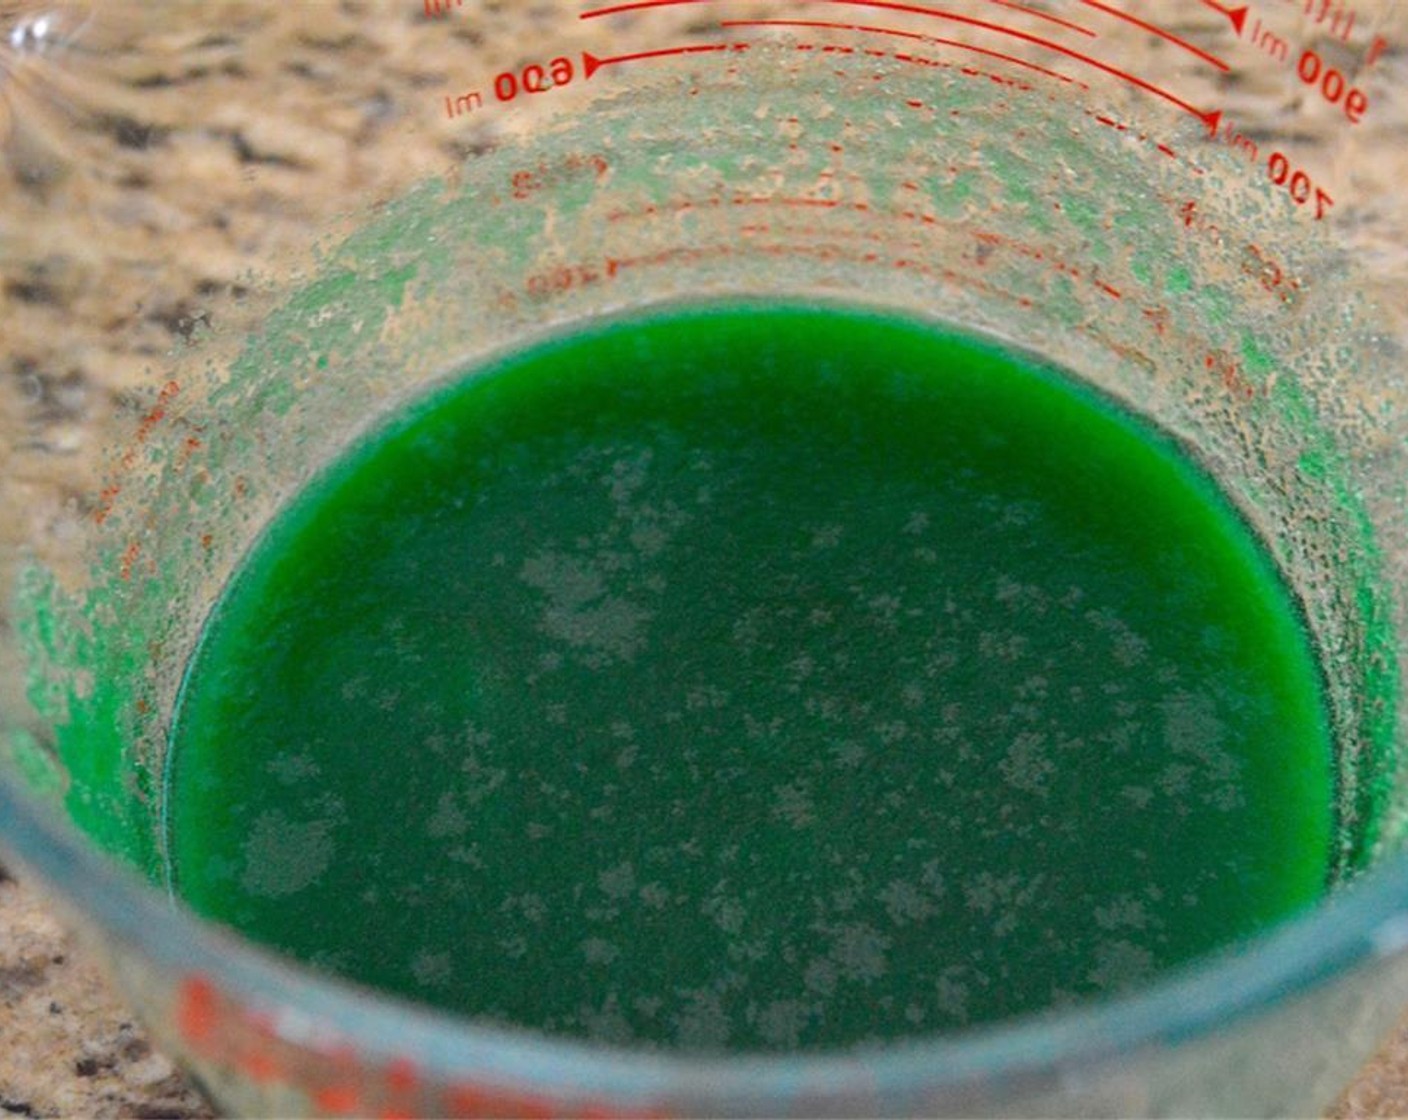 step 2 Combine the Water (1/2 cup). Mint Extract (1/4 cup), and Green Food Coloring (1/4 tsp) in a big bowl and stir it all together.